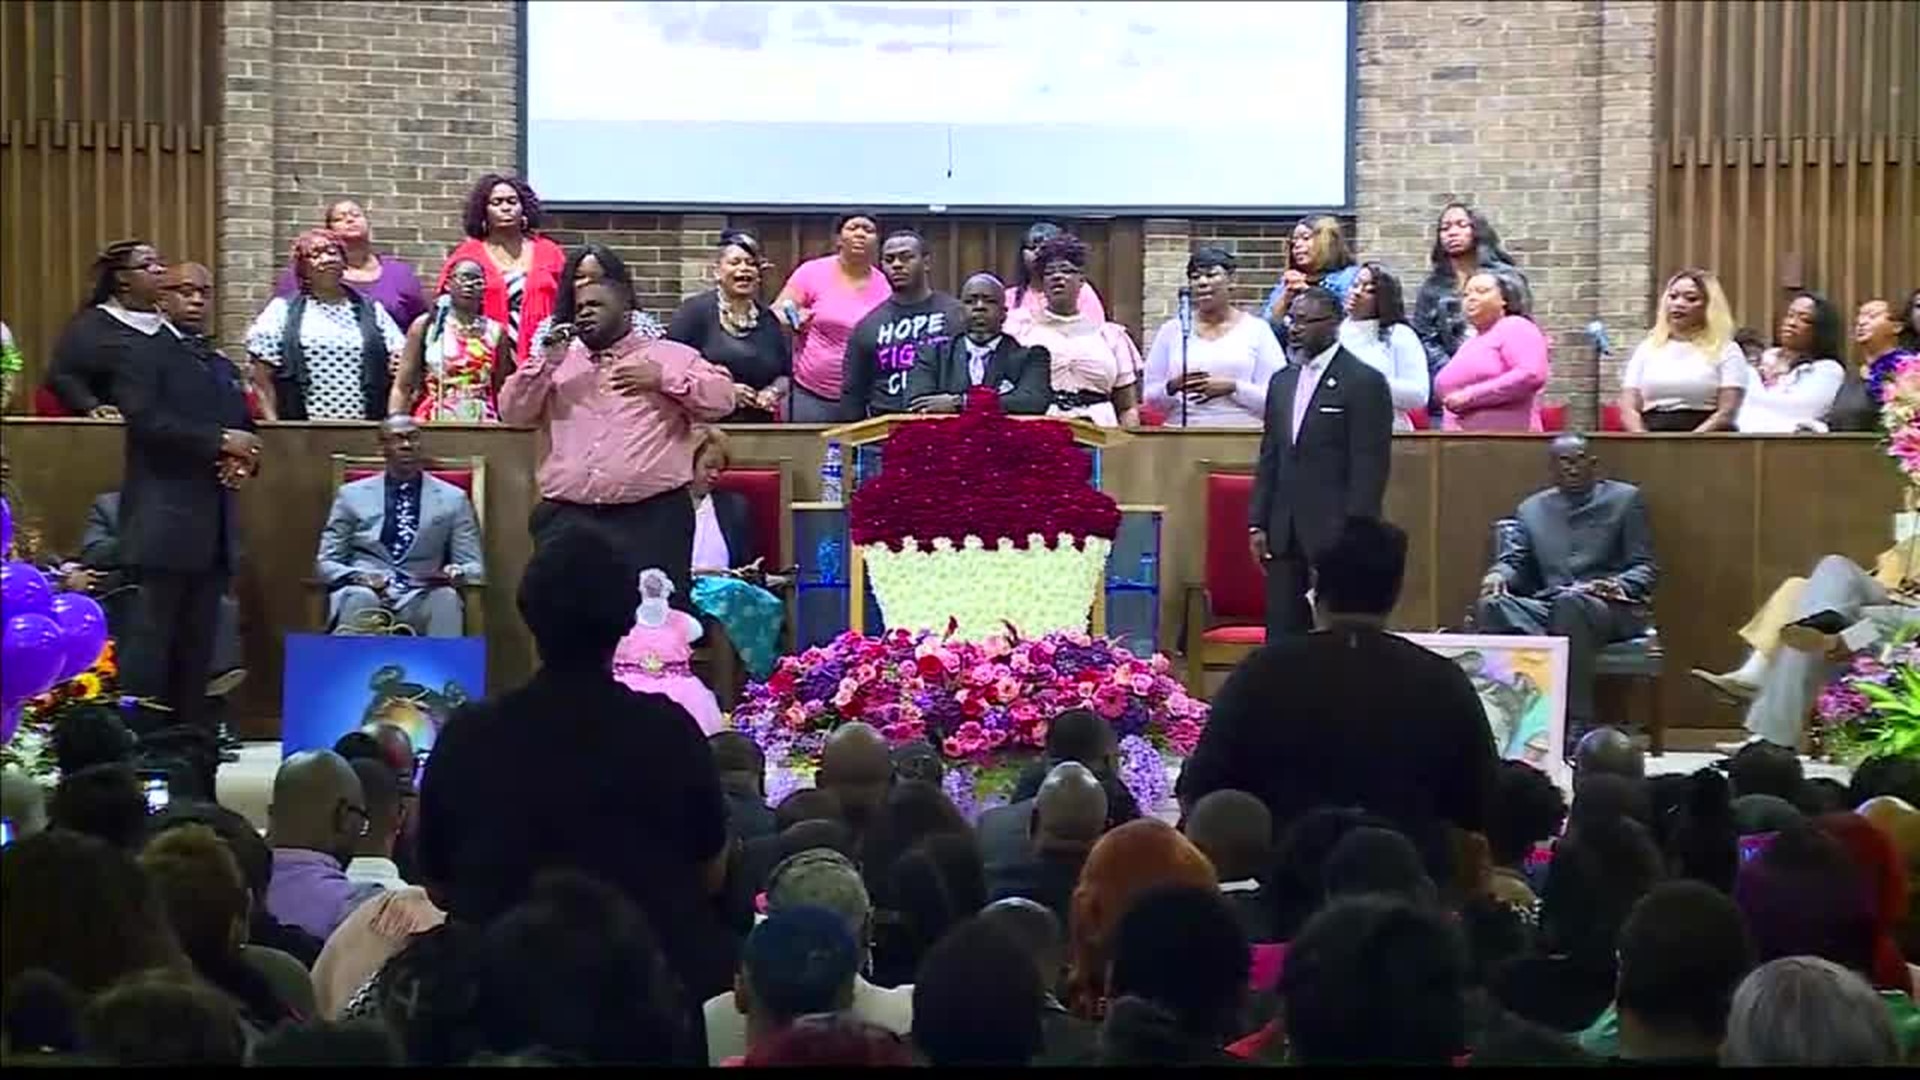 Hundreds of people packed an Alabama church to overflowing Sunday for the funeral of a girl who police say was killed after being kidnapped from a birthday party.